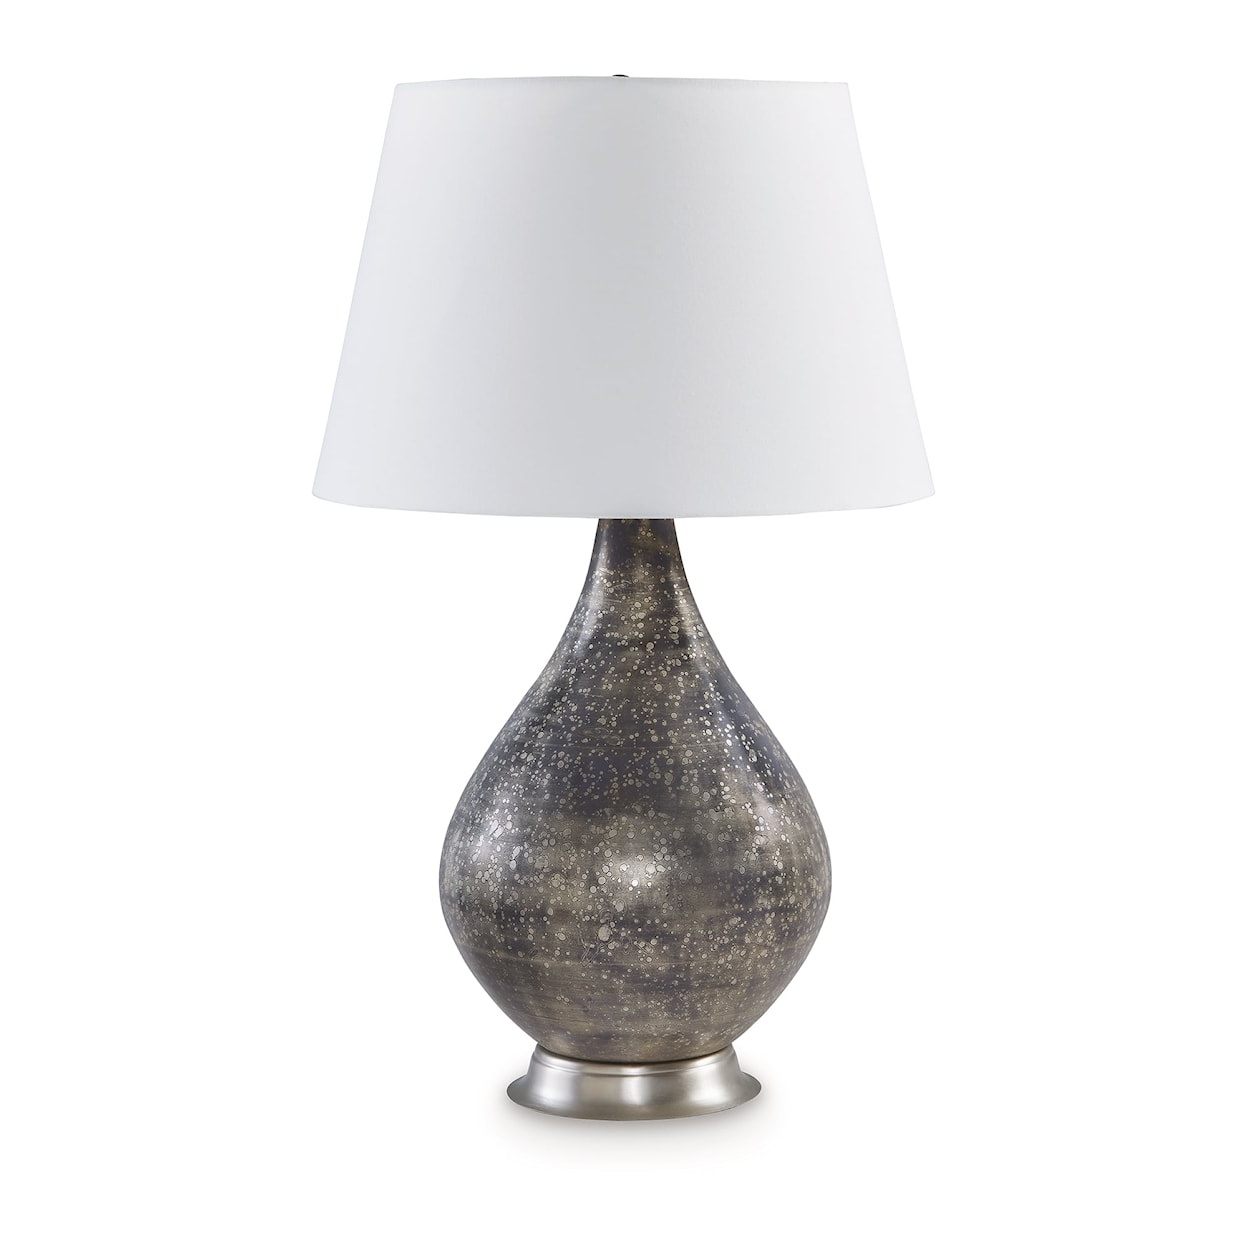 Signature Bluacy Glass Table Lamp